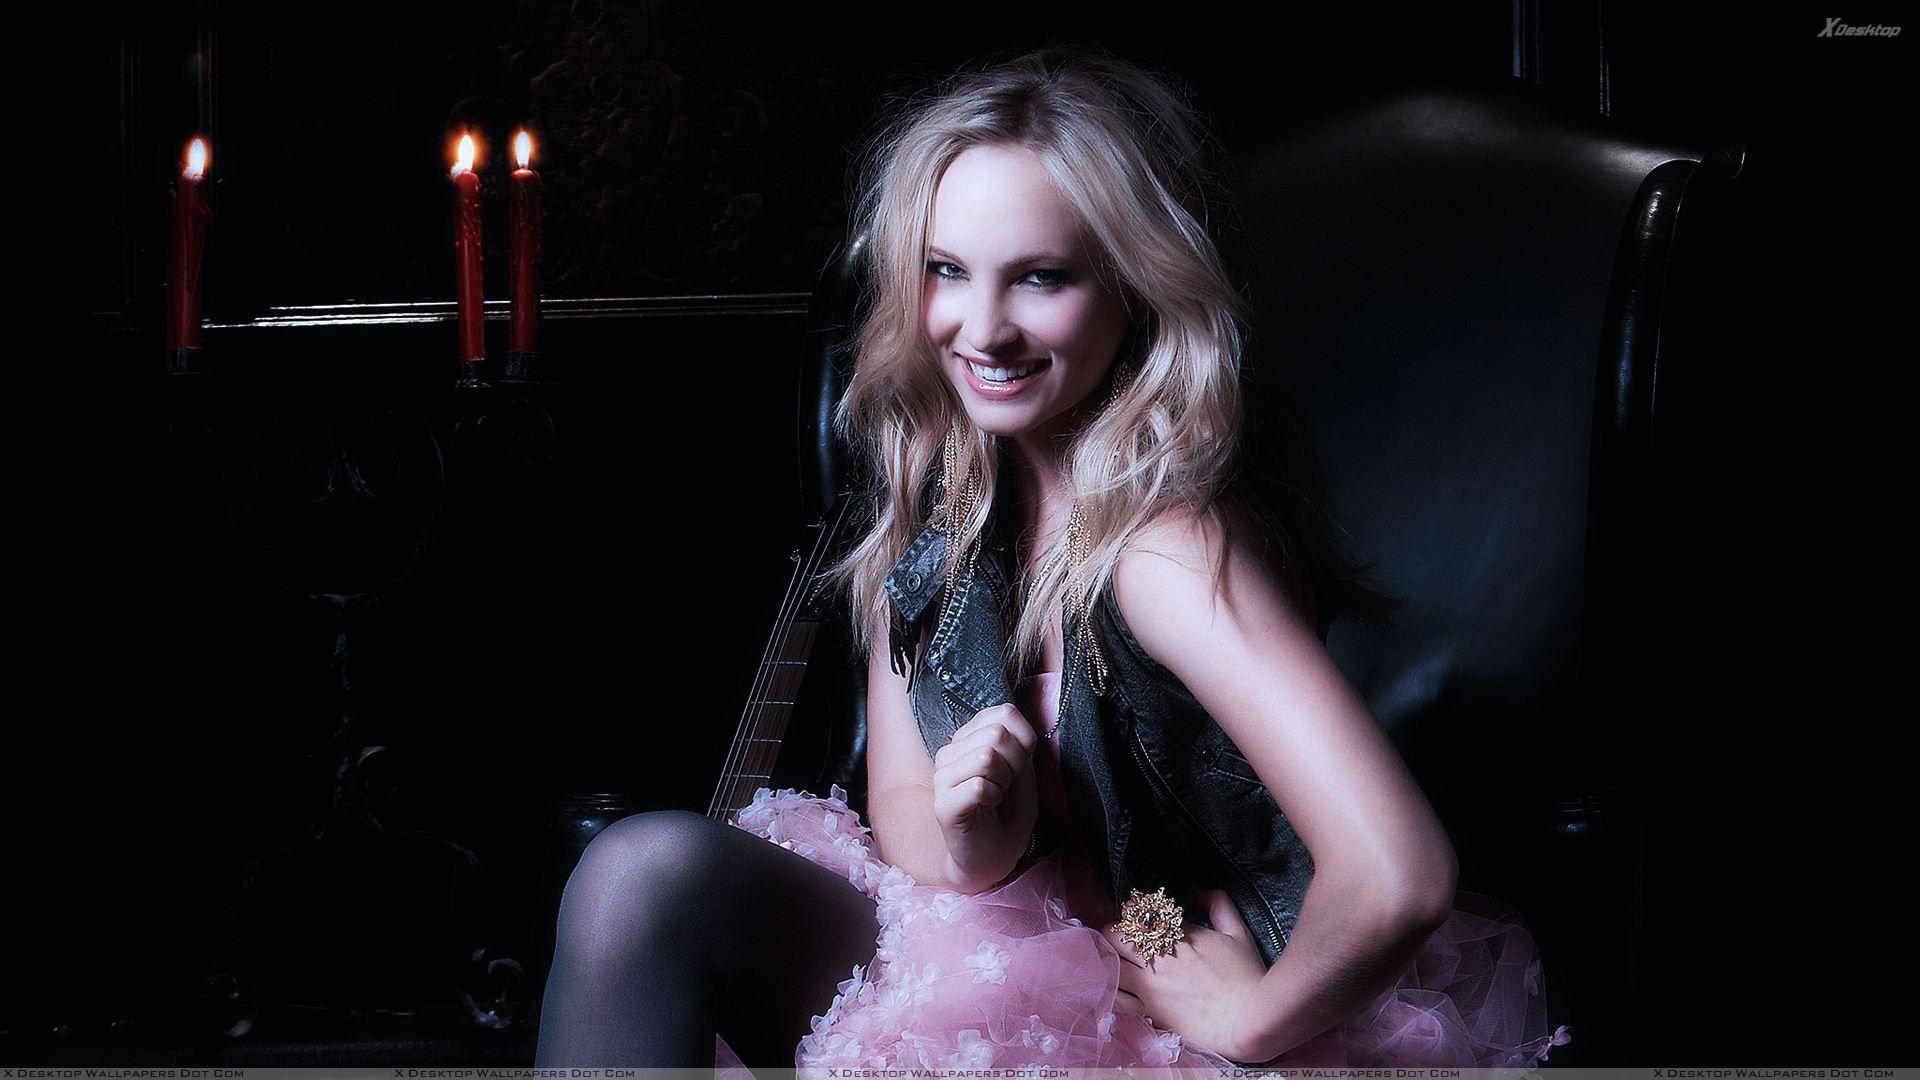 Candice Accola Wallpaper, Photo & Image in HD